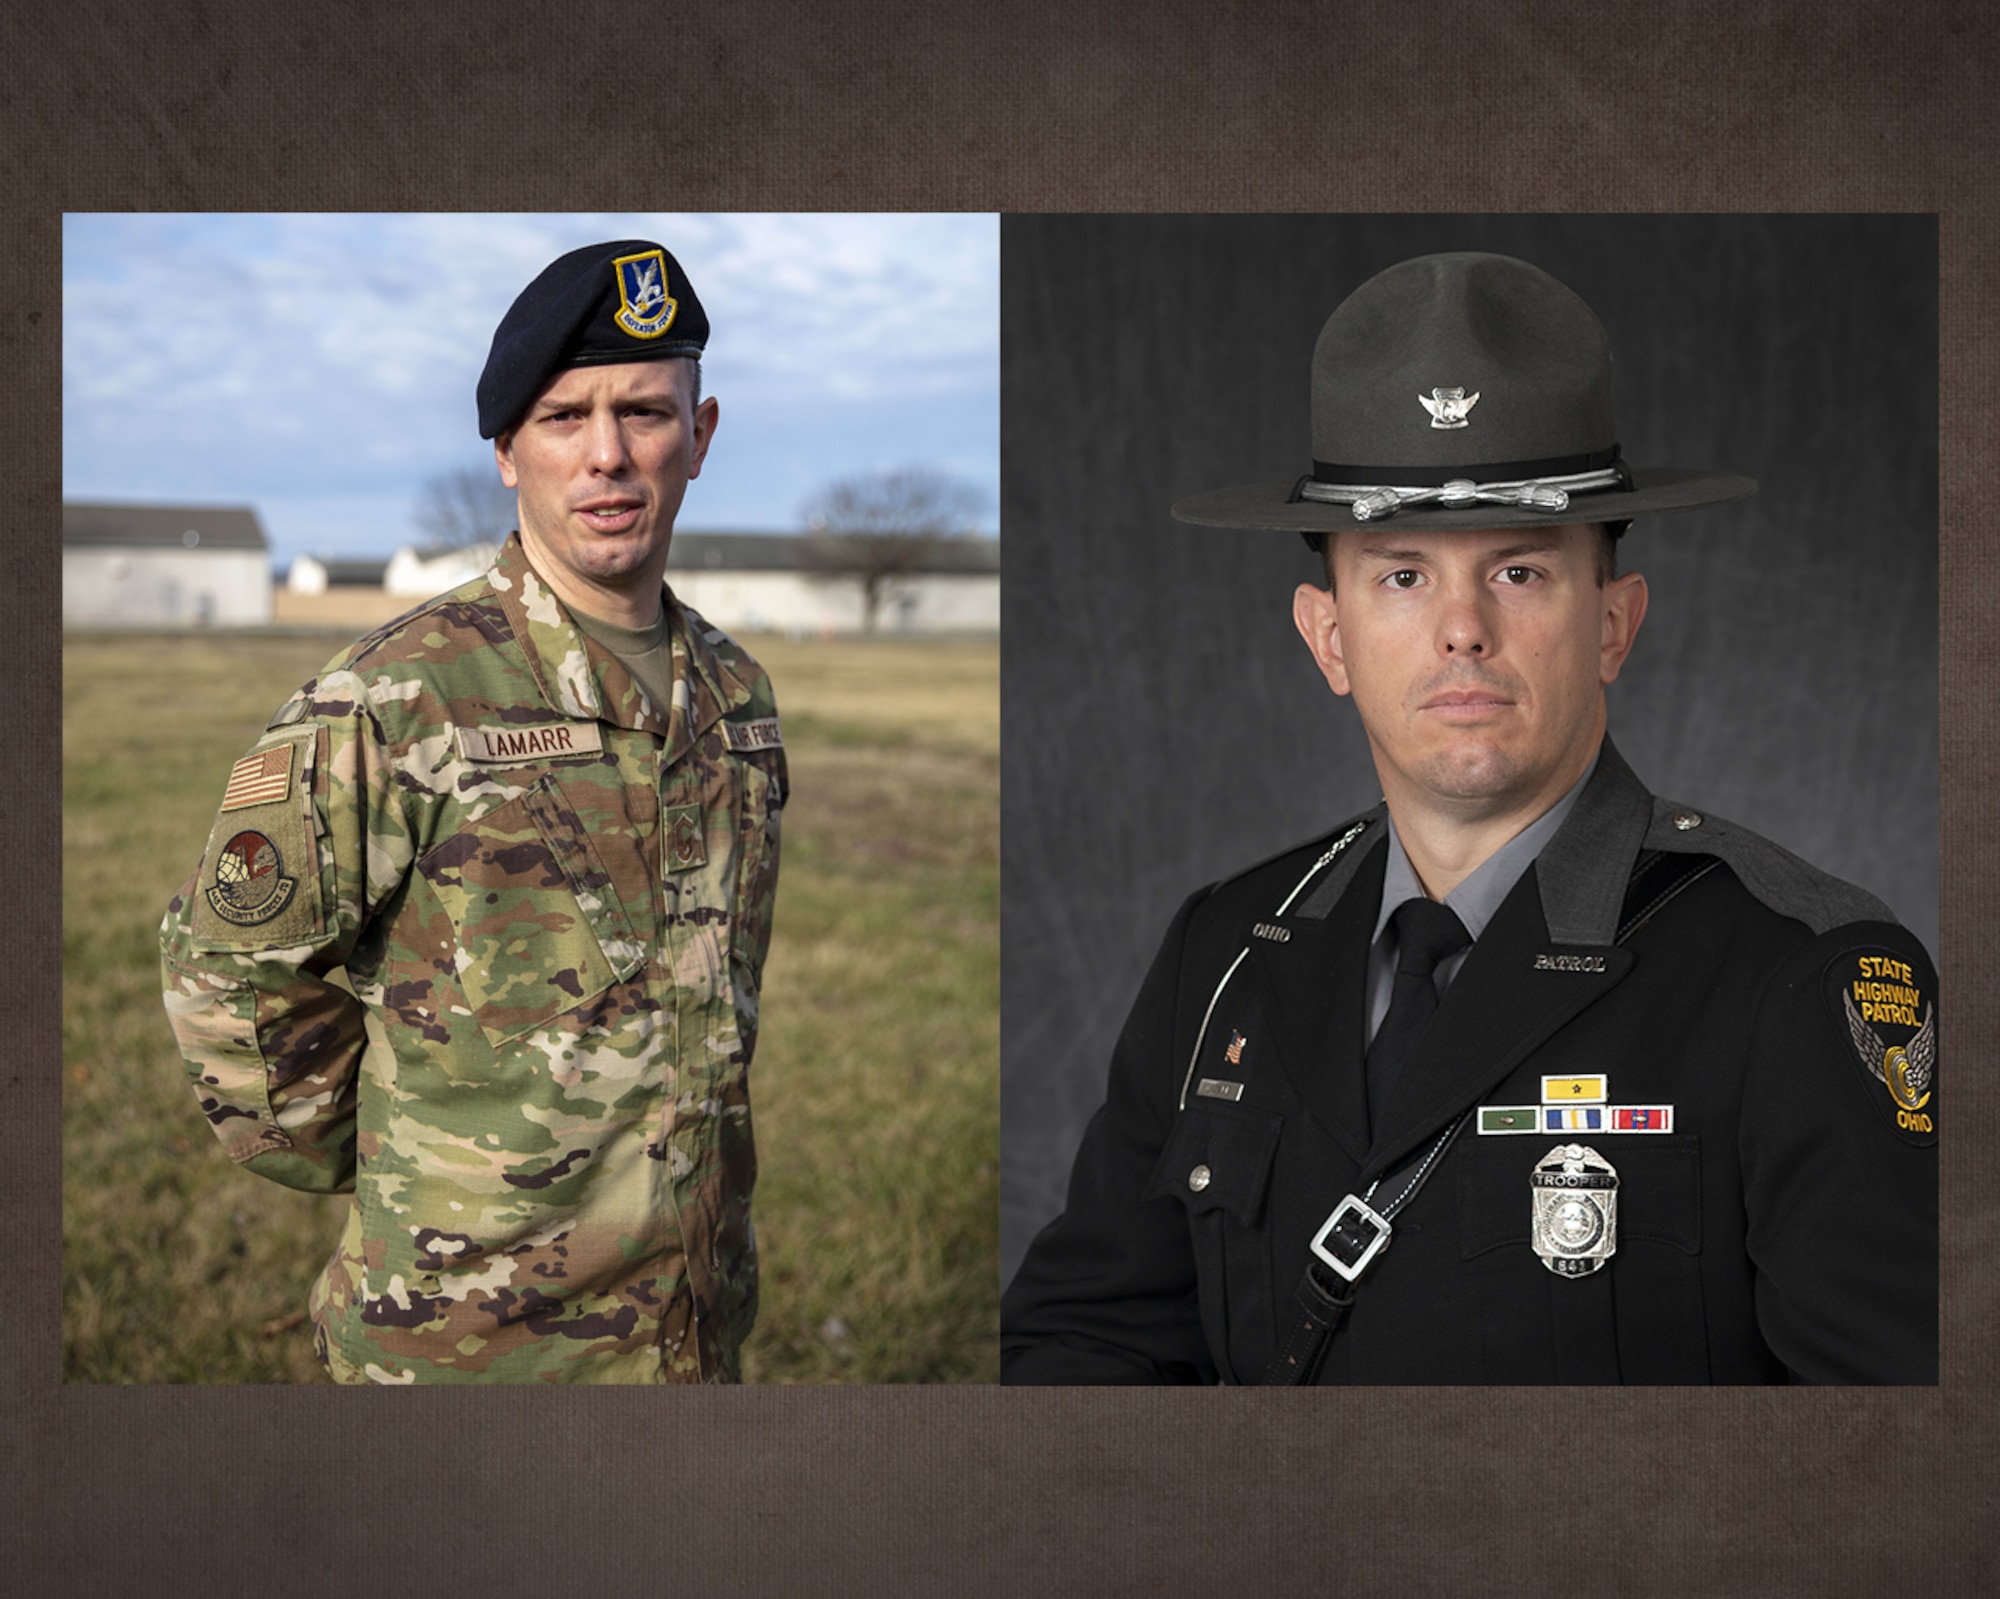 Side-by-side of Ryan LaMarr as a senior master sergeant Reserve Citizen Airman, left, and a Ohio State Highway Patrol trooper, right